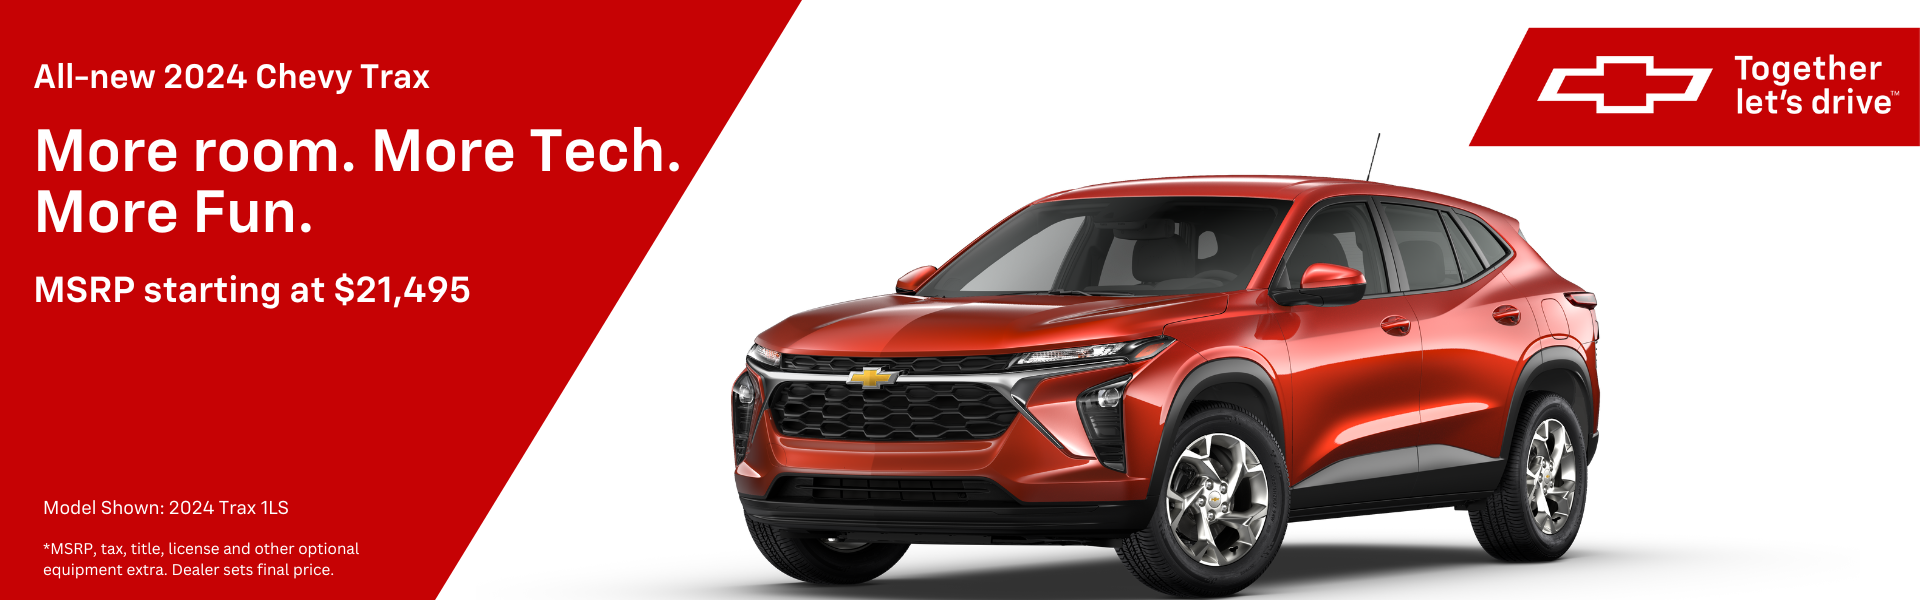 2024 Chevy Trax MSRP Starting at $21,495